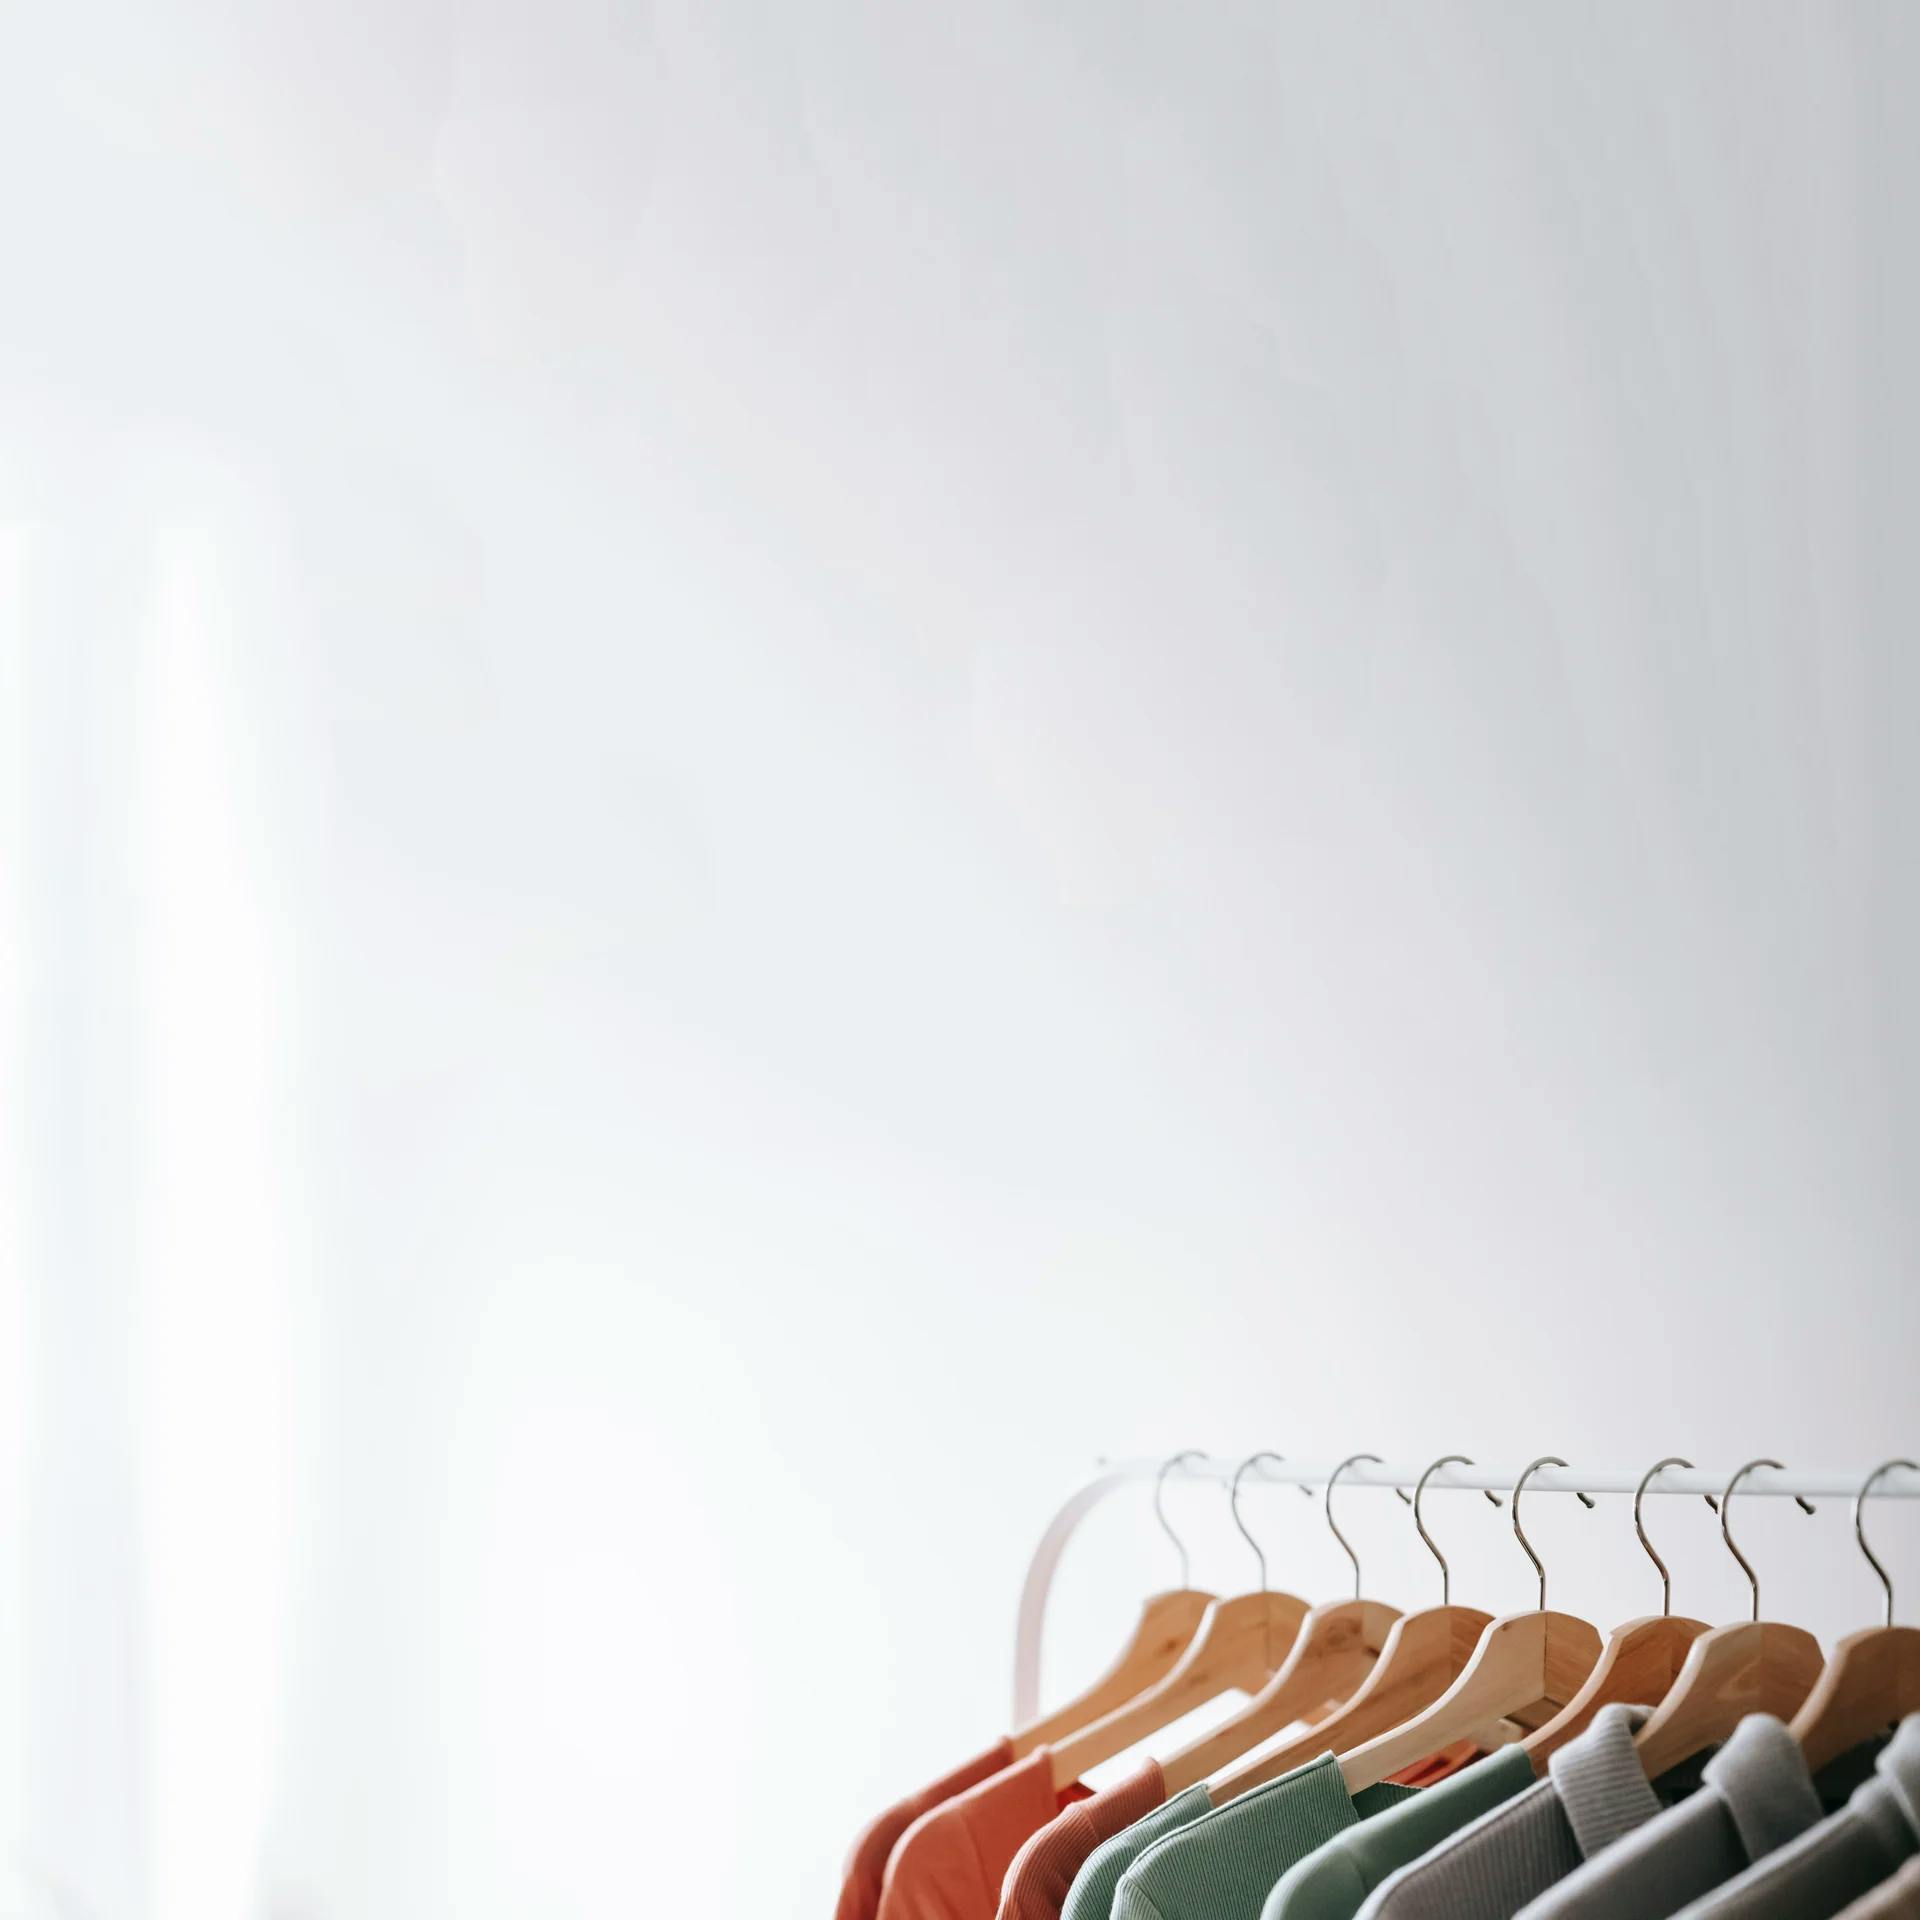 A photo of clothes on hangers